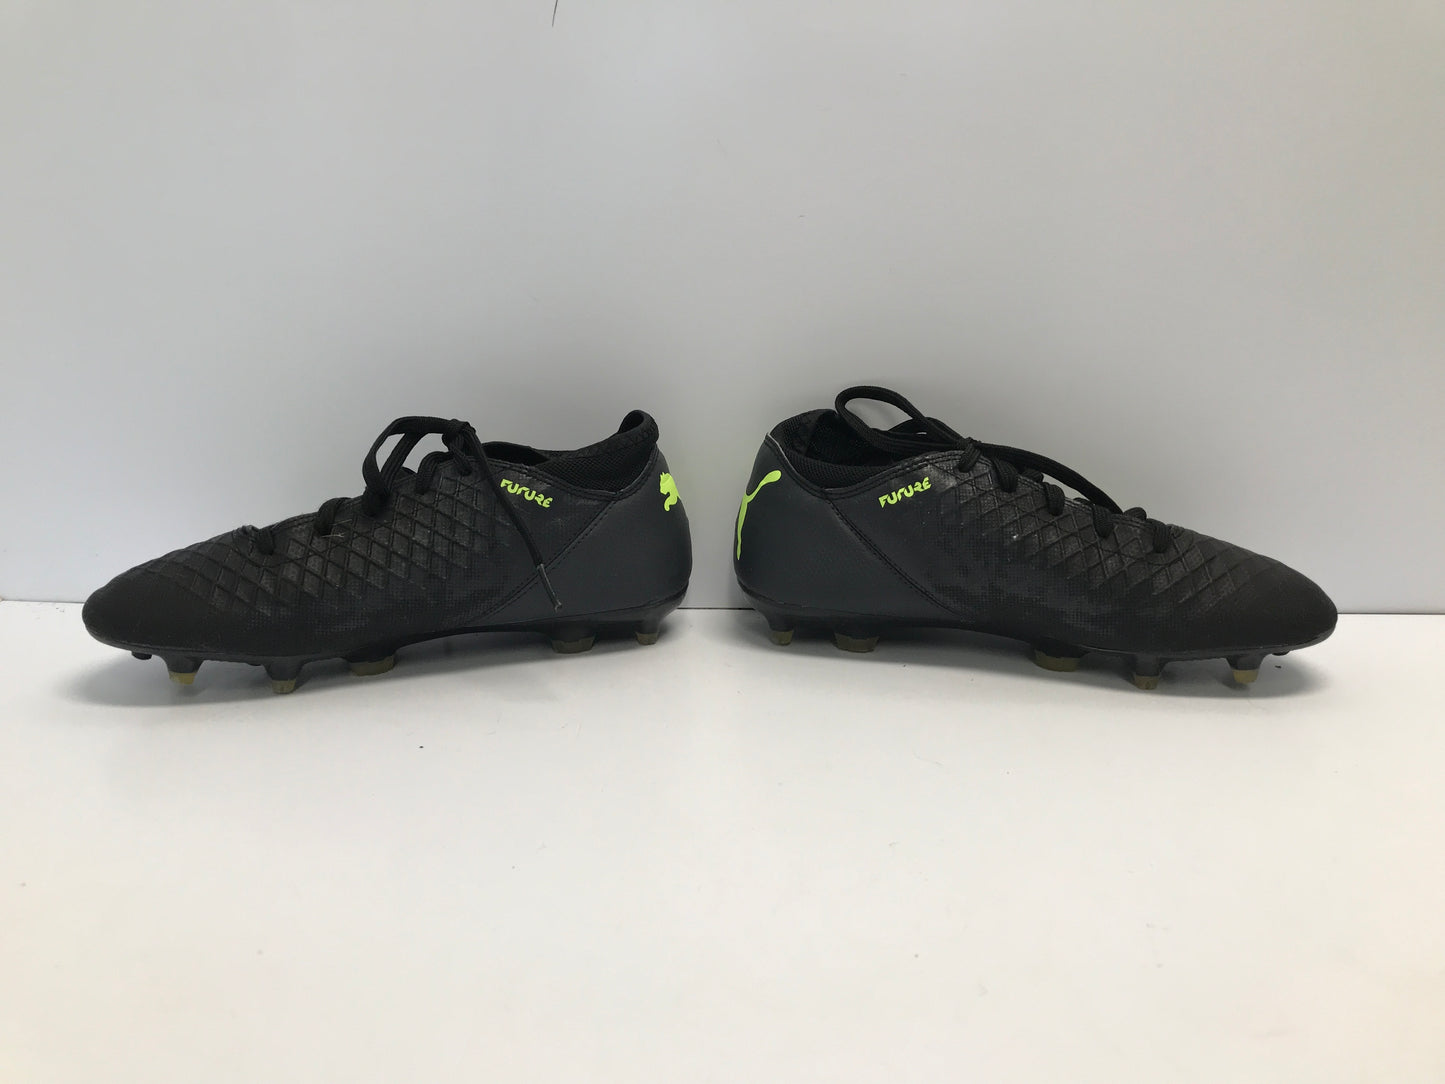 Soccer Shoes Cleats Child Size 4 Puma Future Black Lime Slipper Foot Excellent